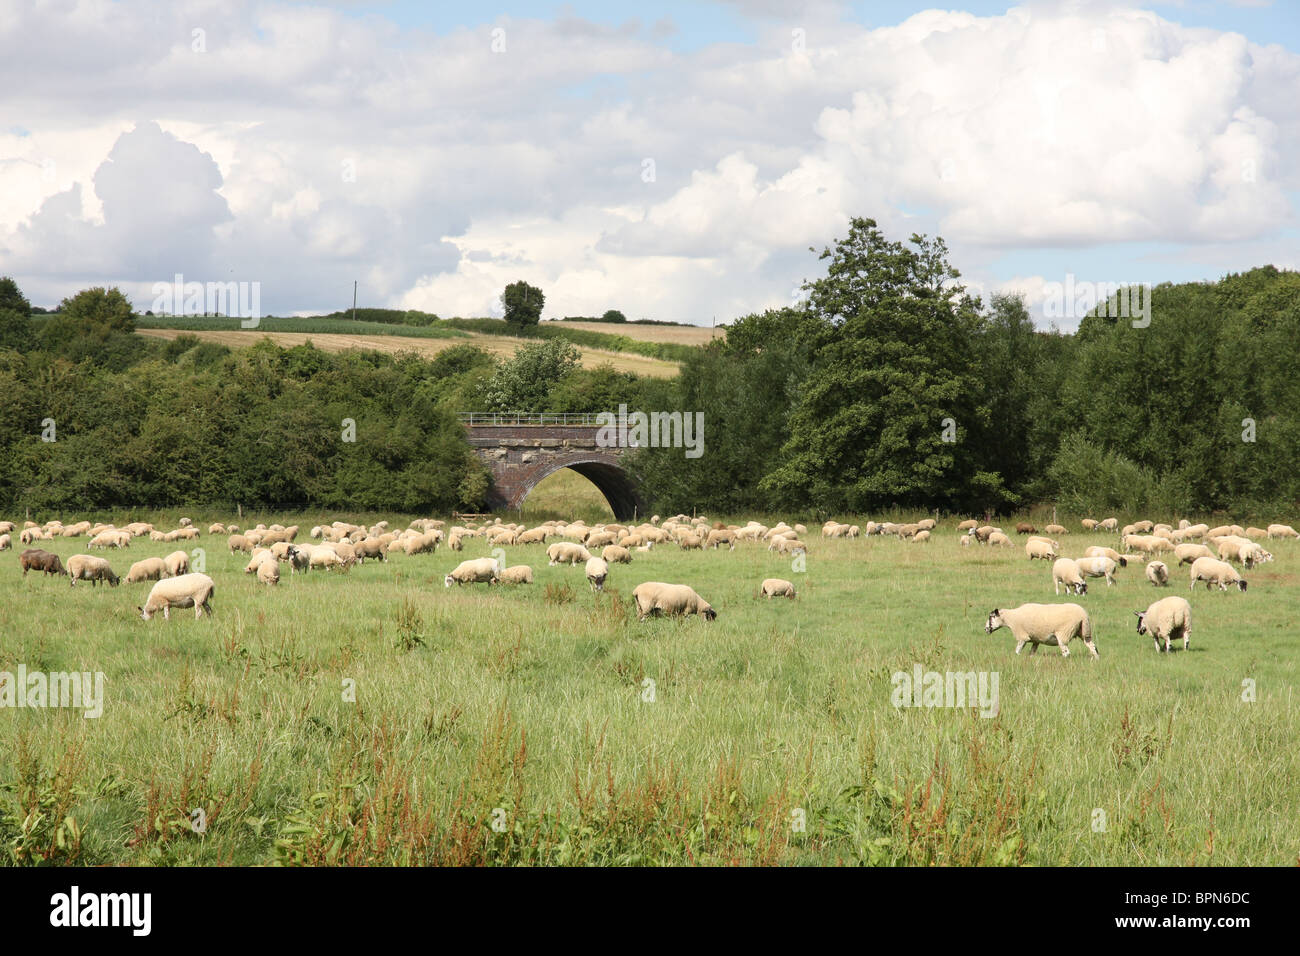 A country scene in rural West Oxfordshire including a sheep and a railway bridge. Stock Photo